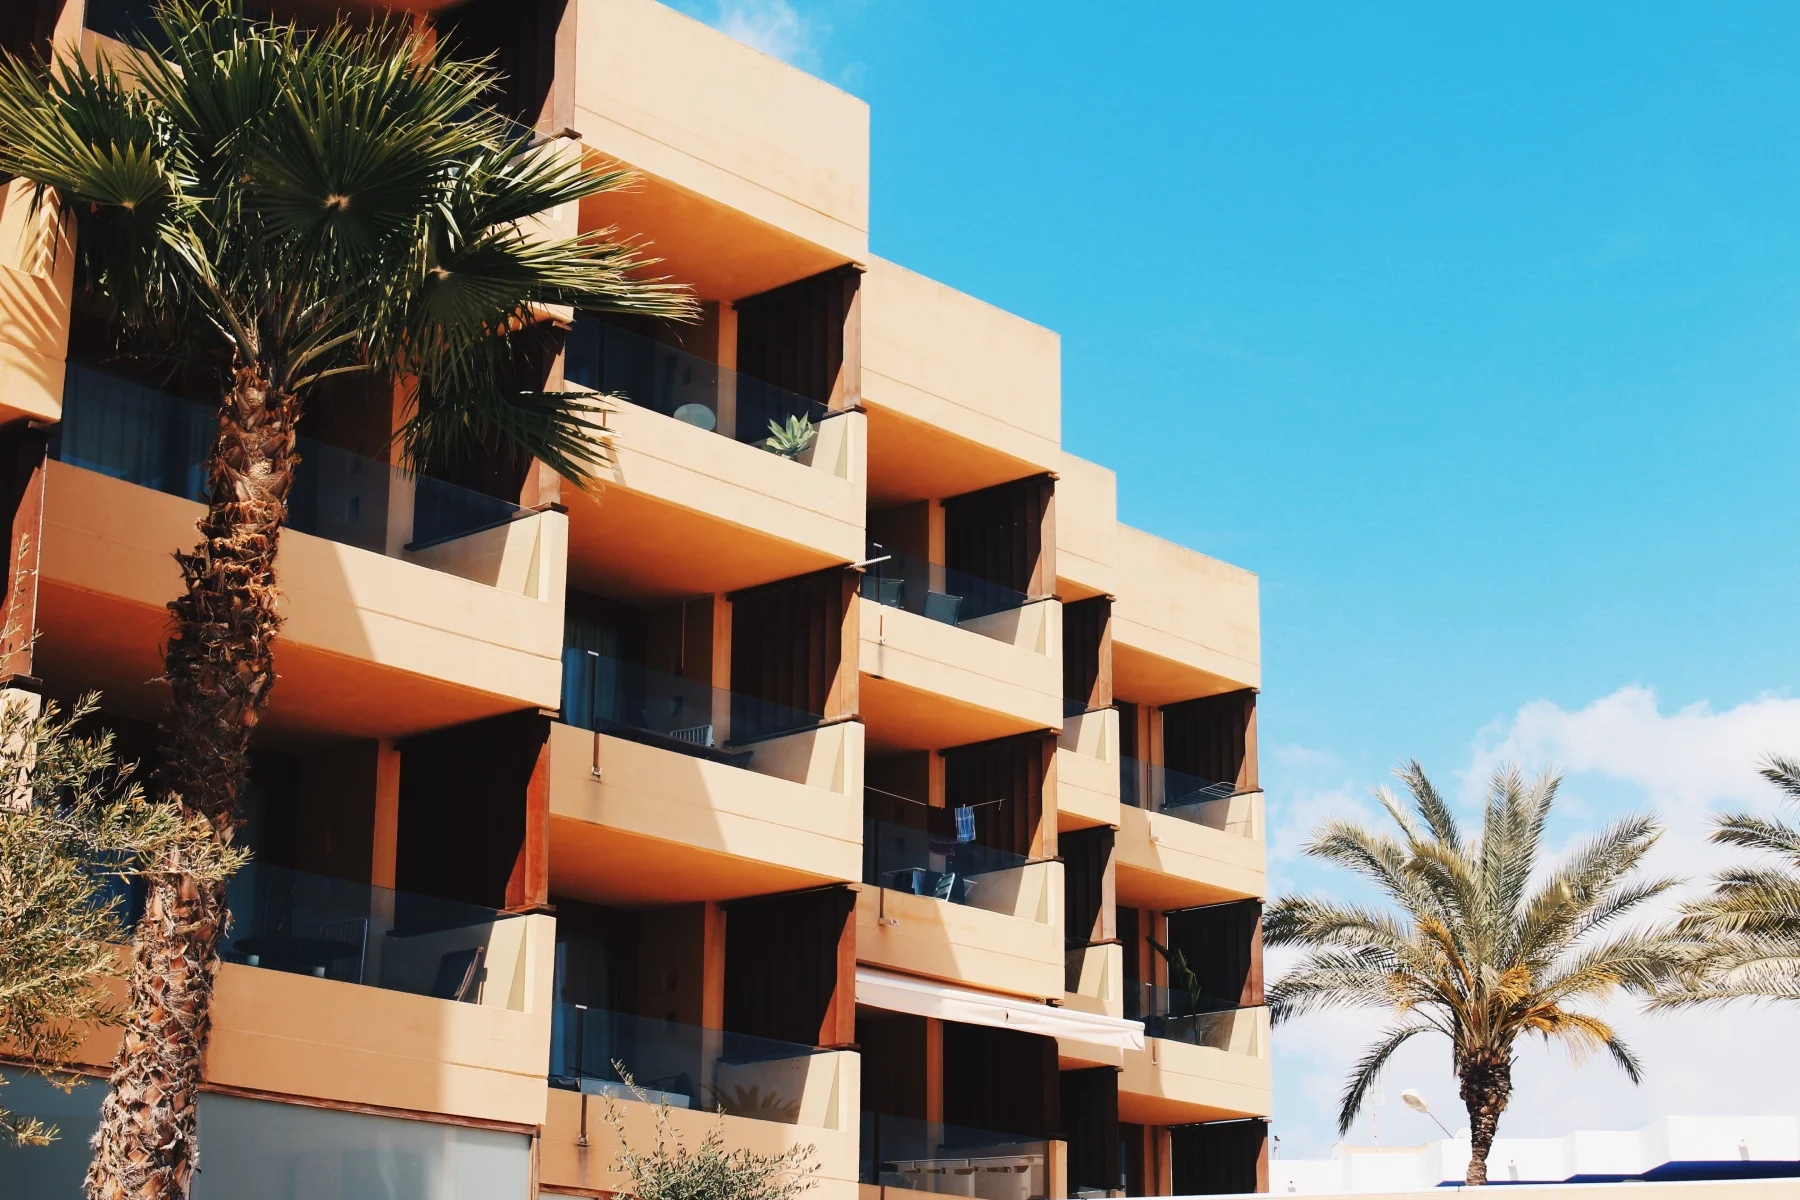 Balconies on a modern apartment building in Ibiza. Palm trees.